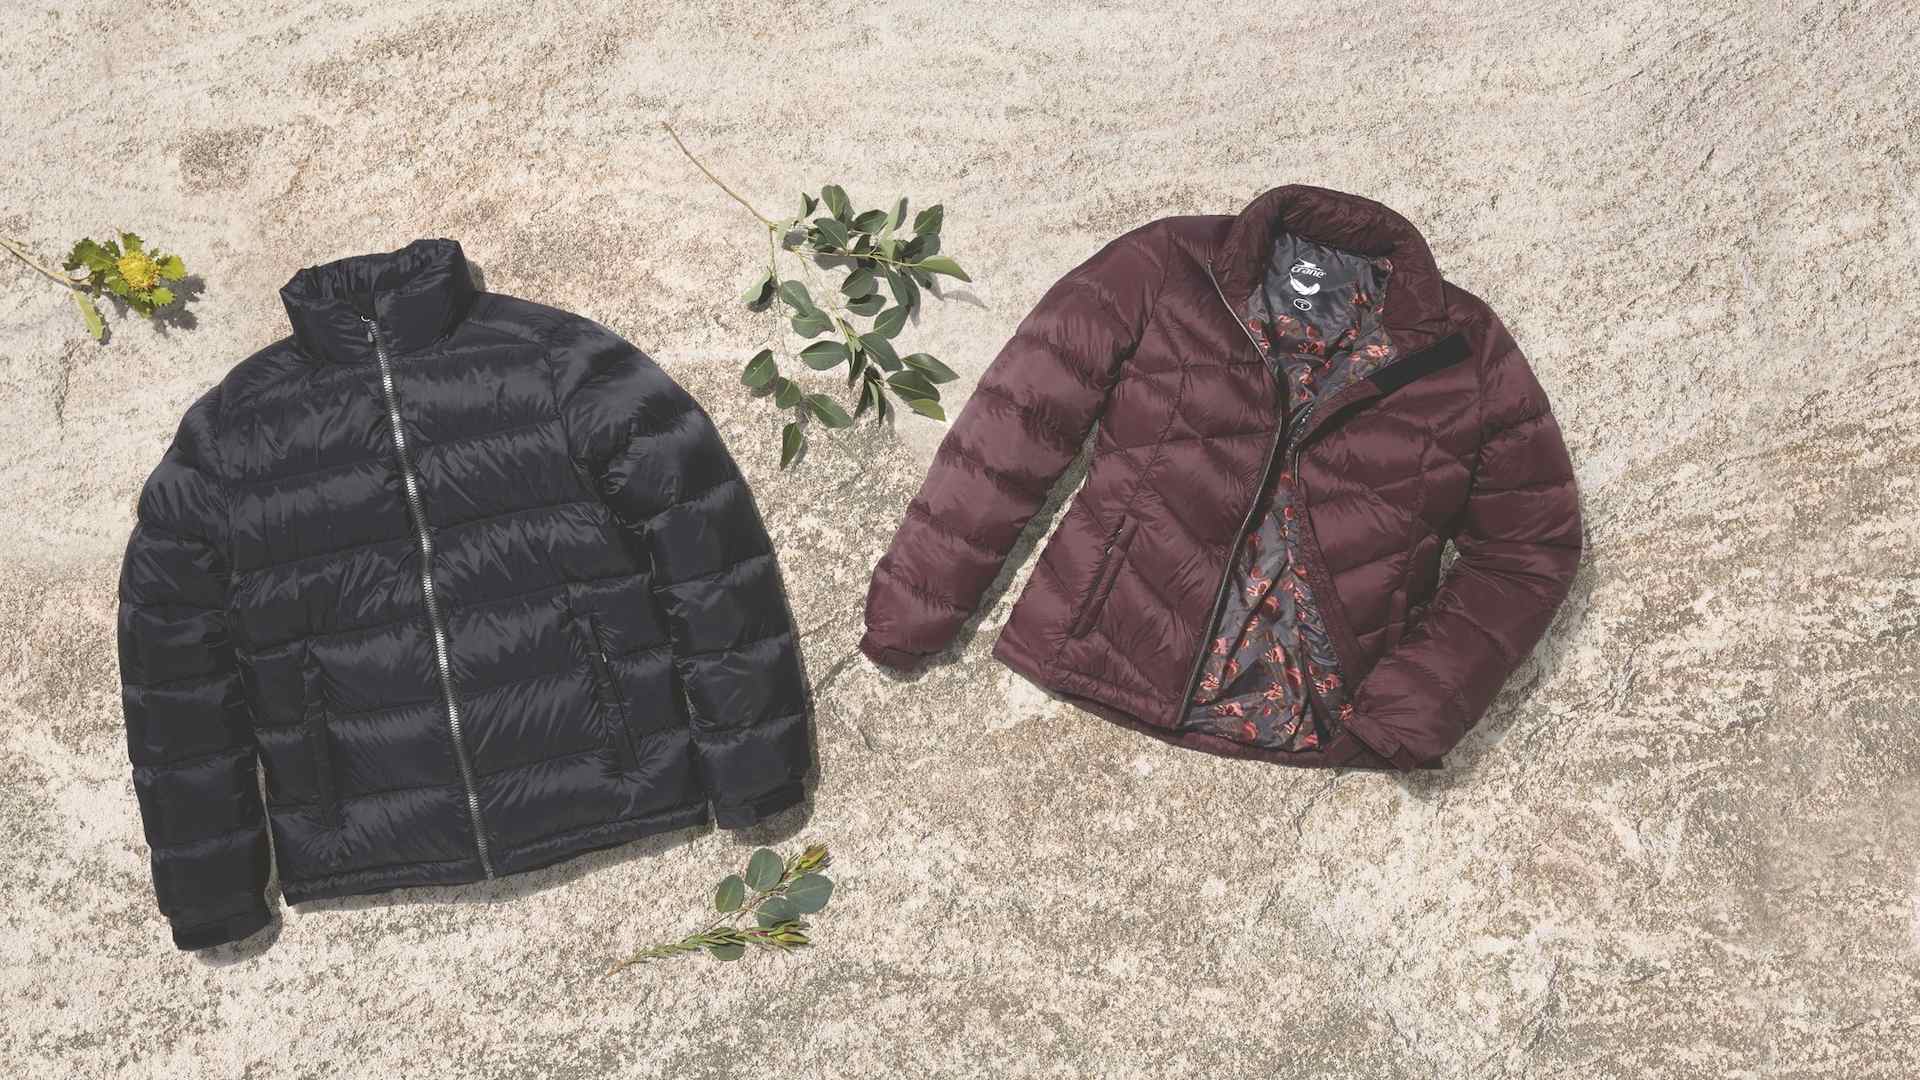 Aldi Is Releasing a Range of Affordable Hiking Gear So You Can Start Hitting the Trails